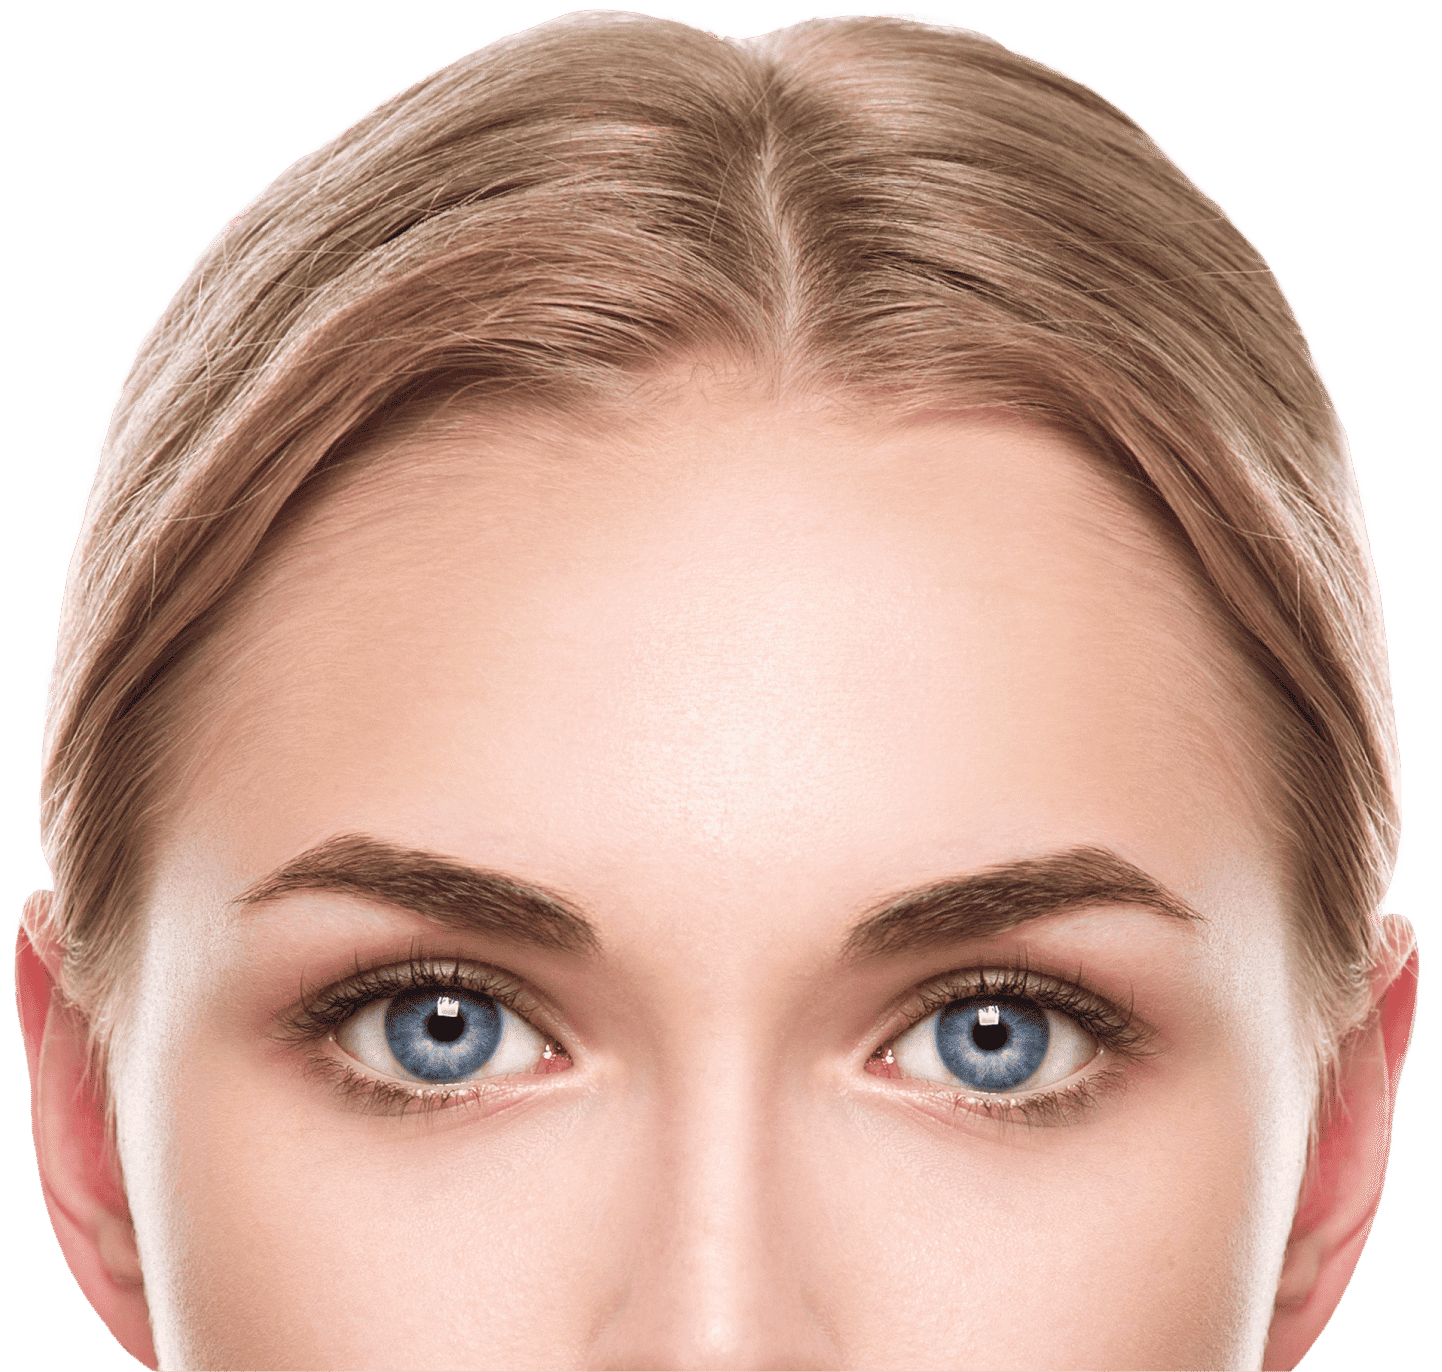 Picture of a blond woman considering an eyebrow transplant